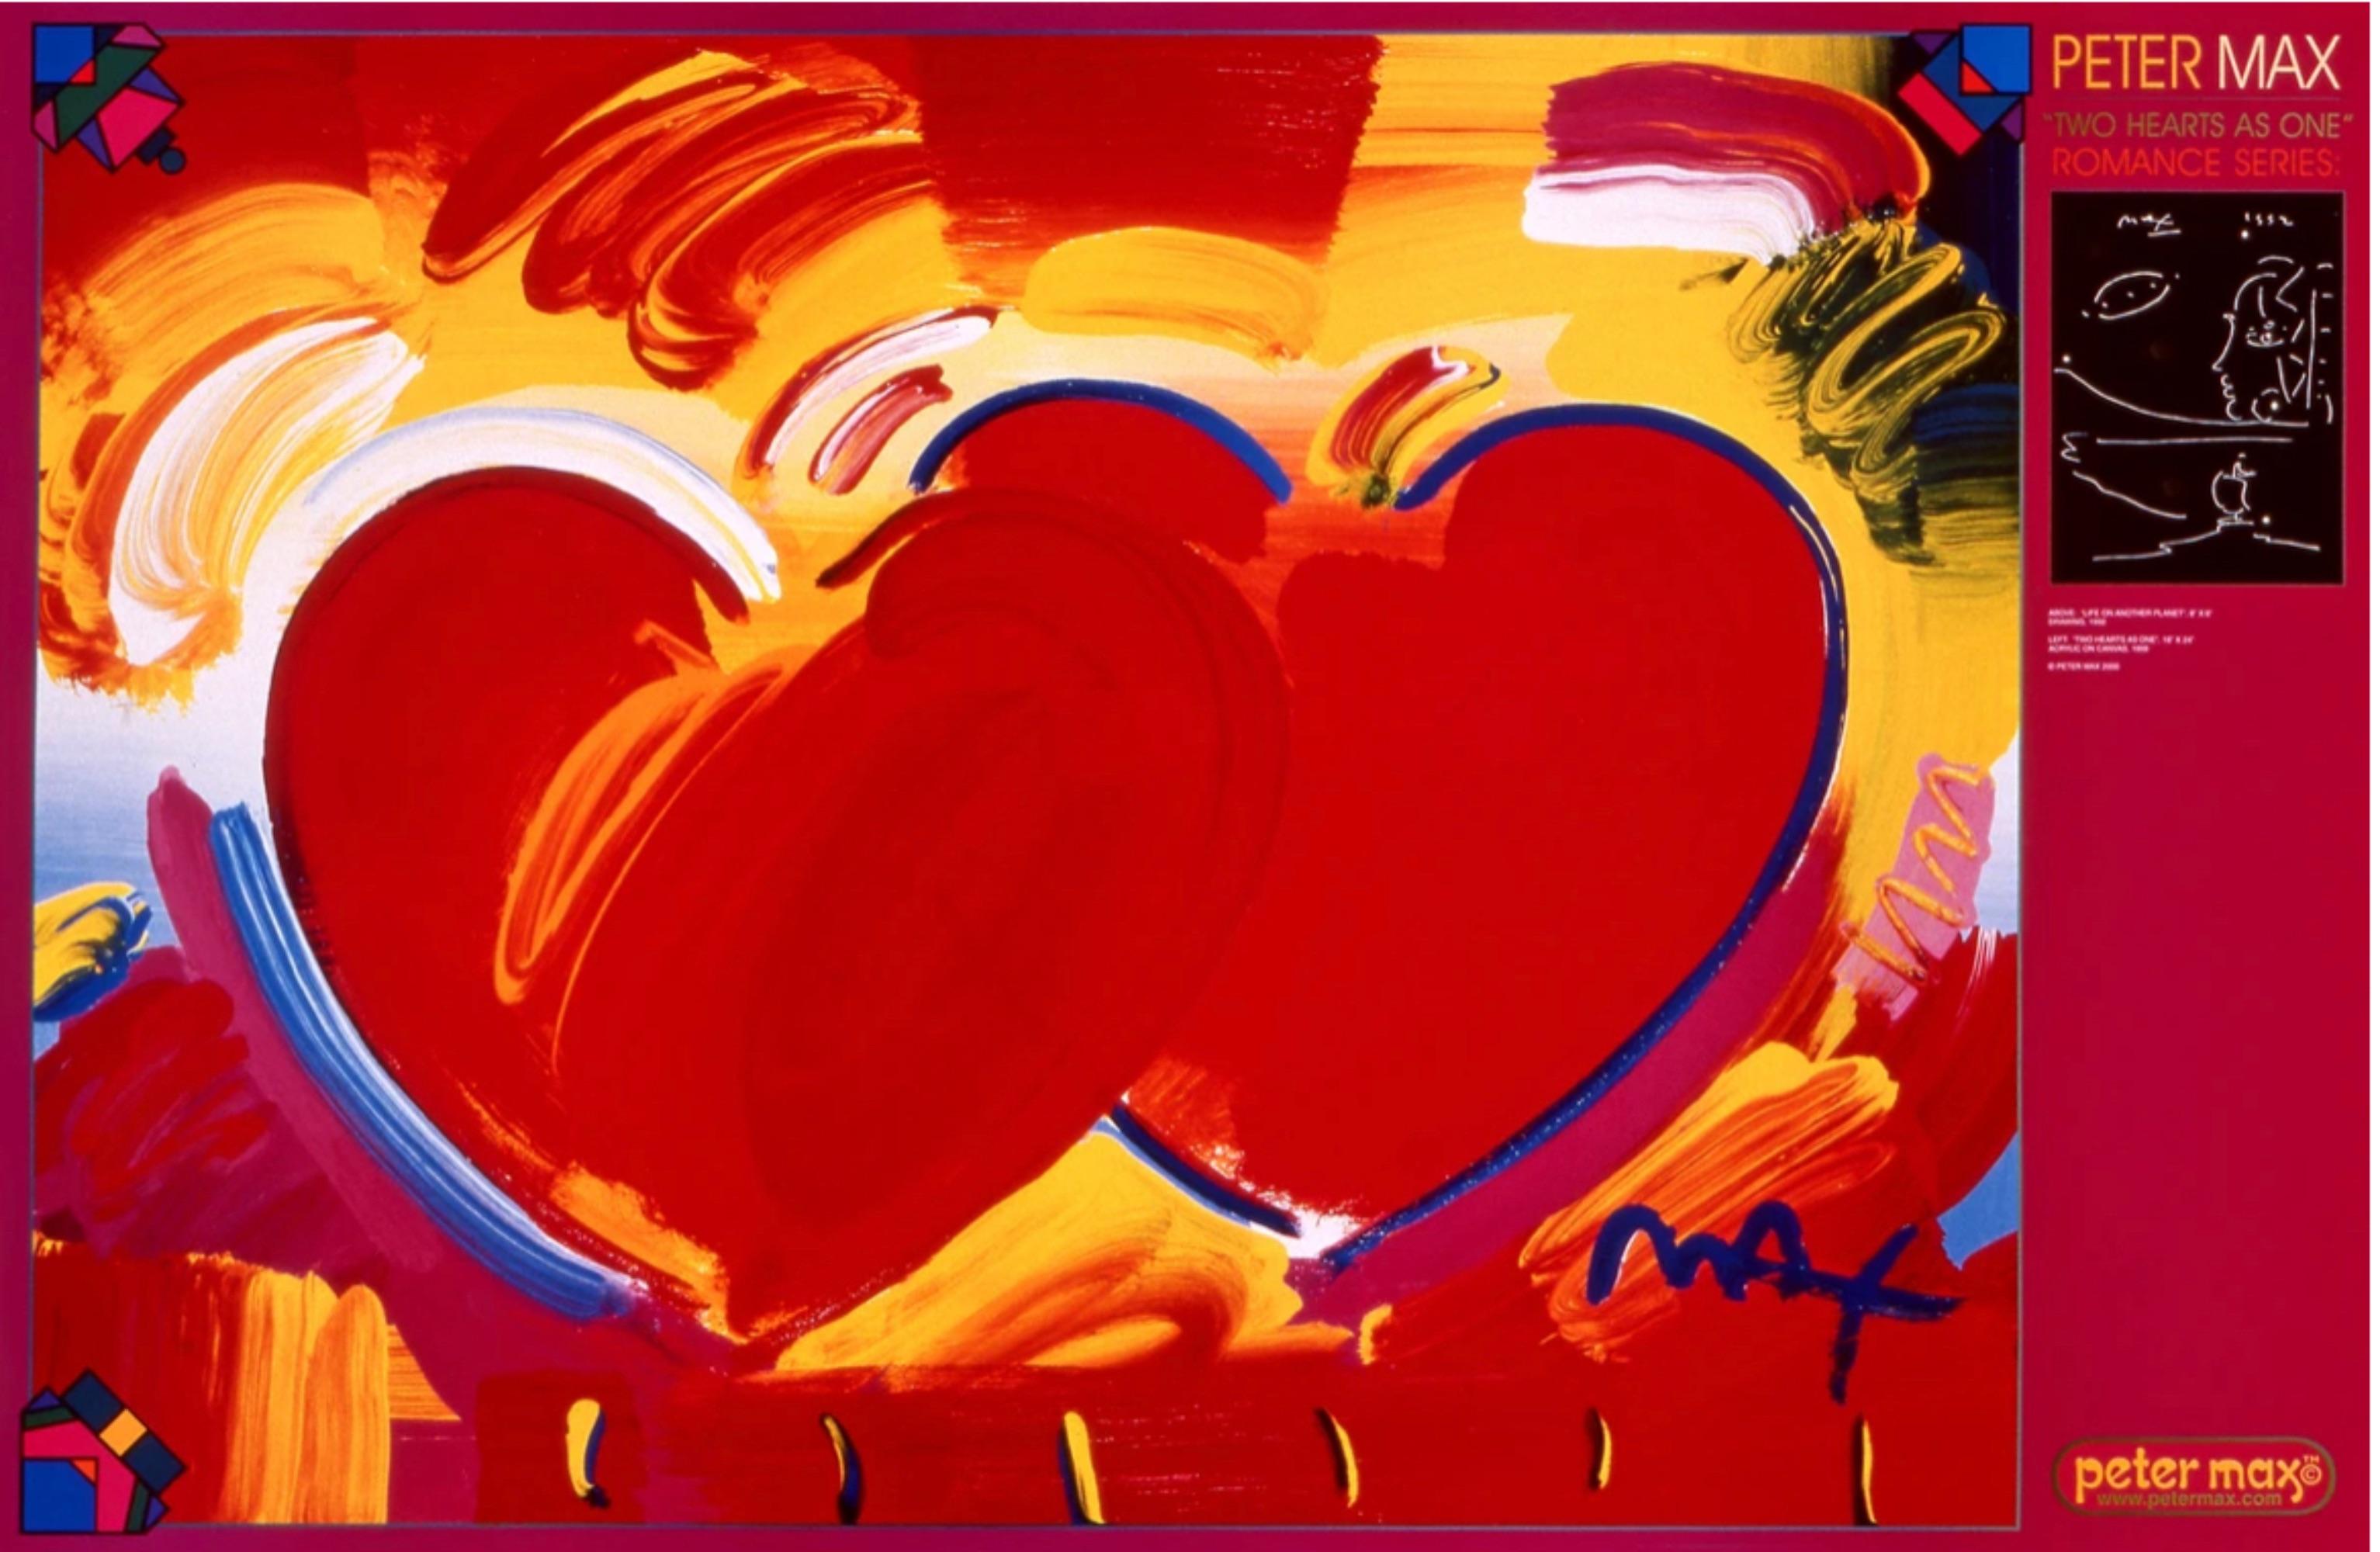 Artist: Peter Max (1937)
Title: Two Hearts As One
Year: 2000
Medium: Offset lithograph on premium paper
Size: 24 x 36 inches
Condition: Excellent
Inscription: Signed by the artist.
Notes: Published by Via Max. Sold signed by the artist and dedicated